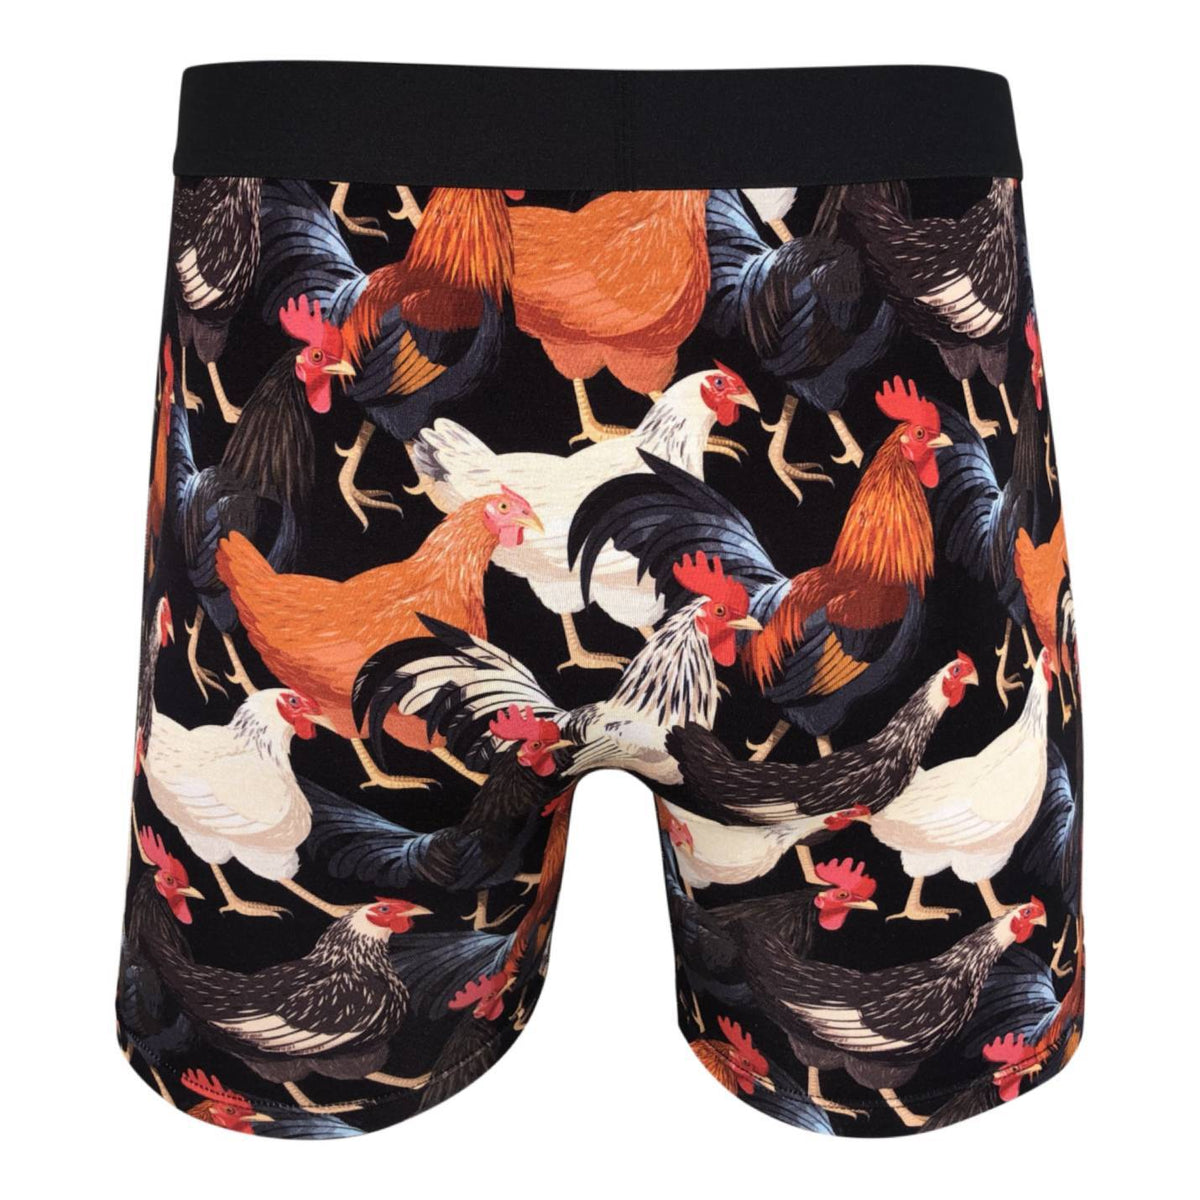 Men's Chickens and Roosters Underwear – Good Luck Sock